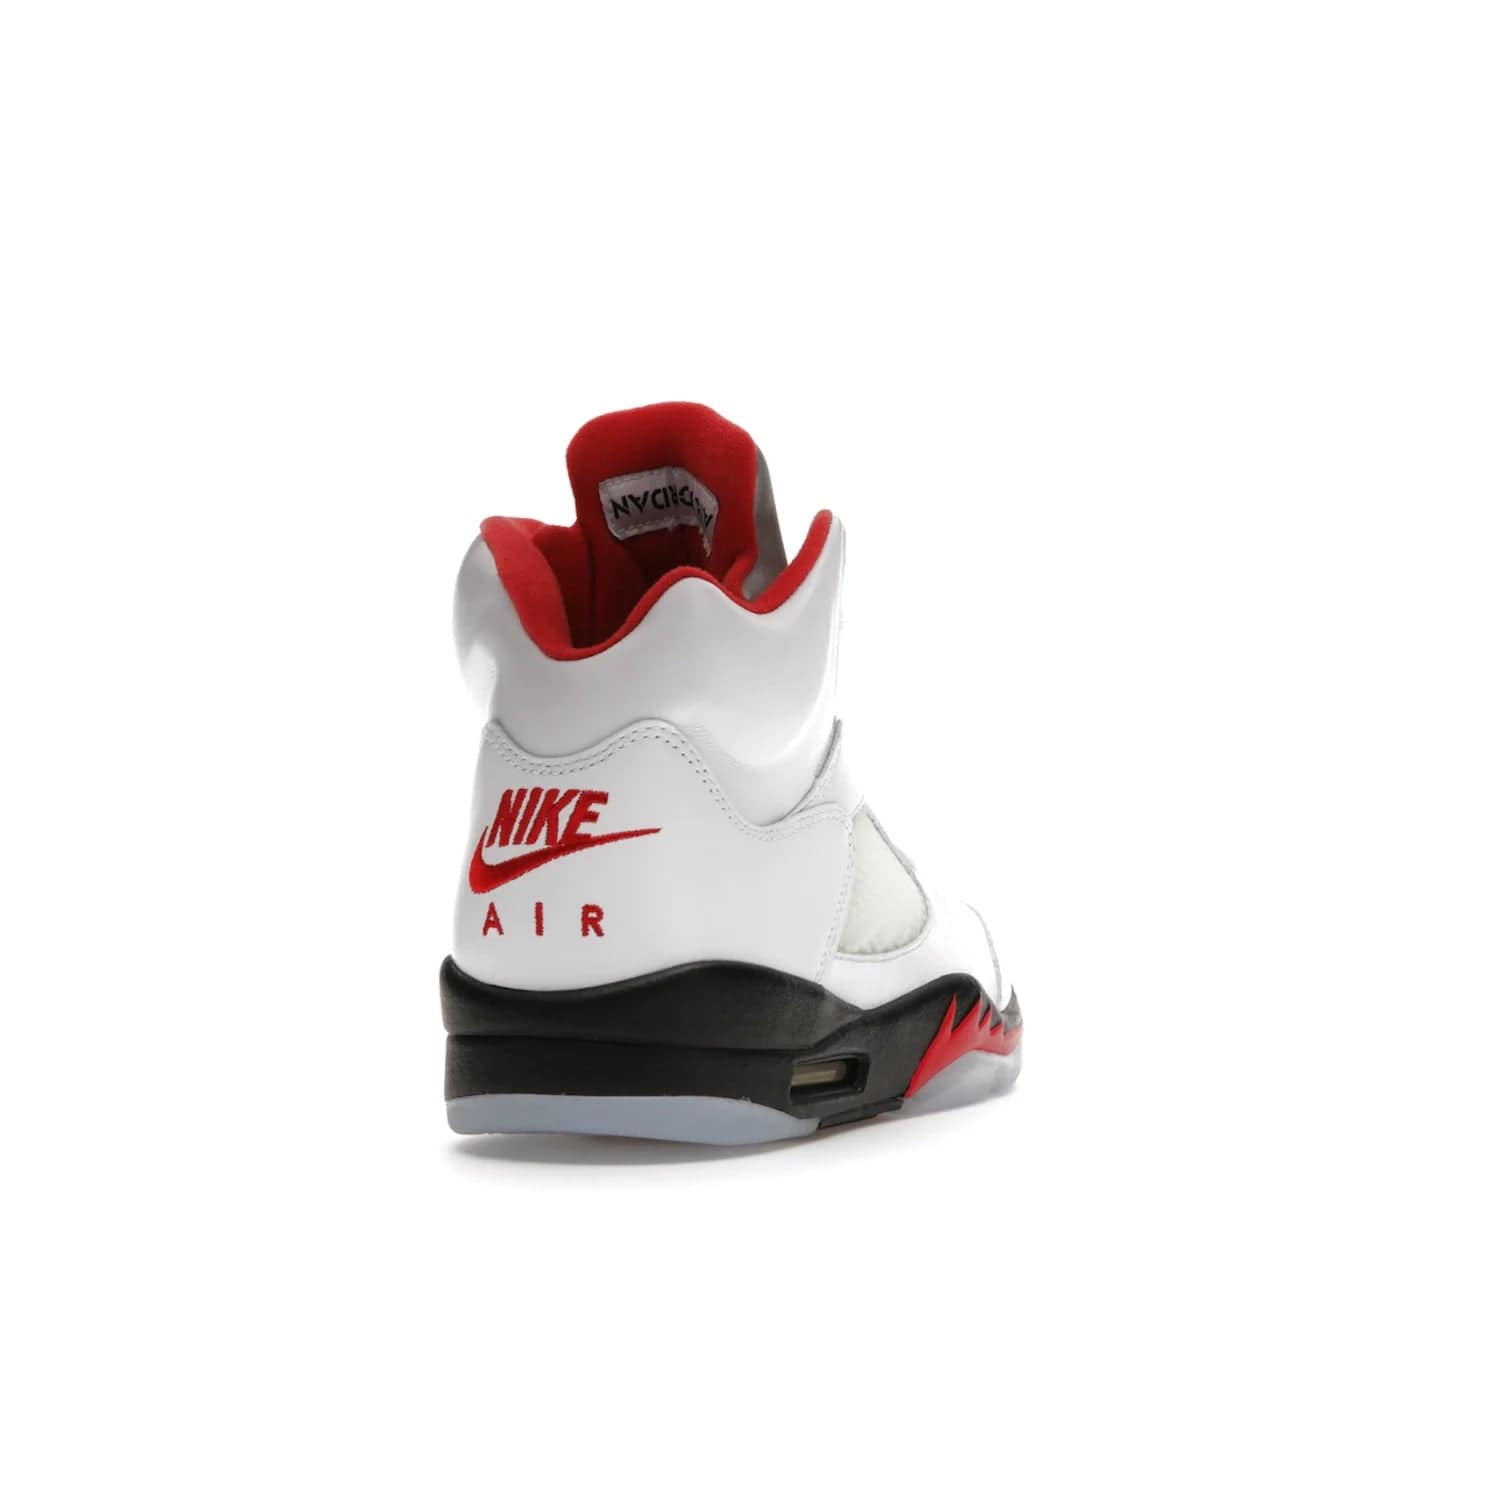 Jordan 5 Retro Fire Red Silver Tongue (2020) - Image 30 - Only at www.BallersClubKickz.com - Experience classic styling with the Jordan 5 Retro Fire Red Silver Tongue (2020). Features a white leather upper, 3M reflective tongue, midsole colorblocking, and an icy translucent outsole. Now available, upgrade your shoe collection today.